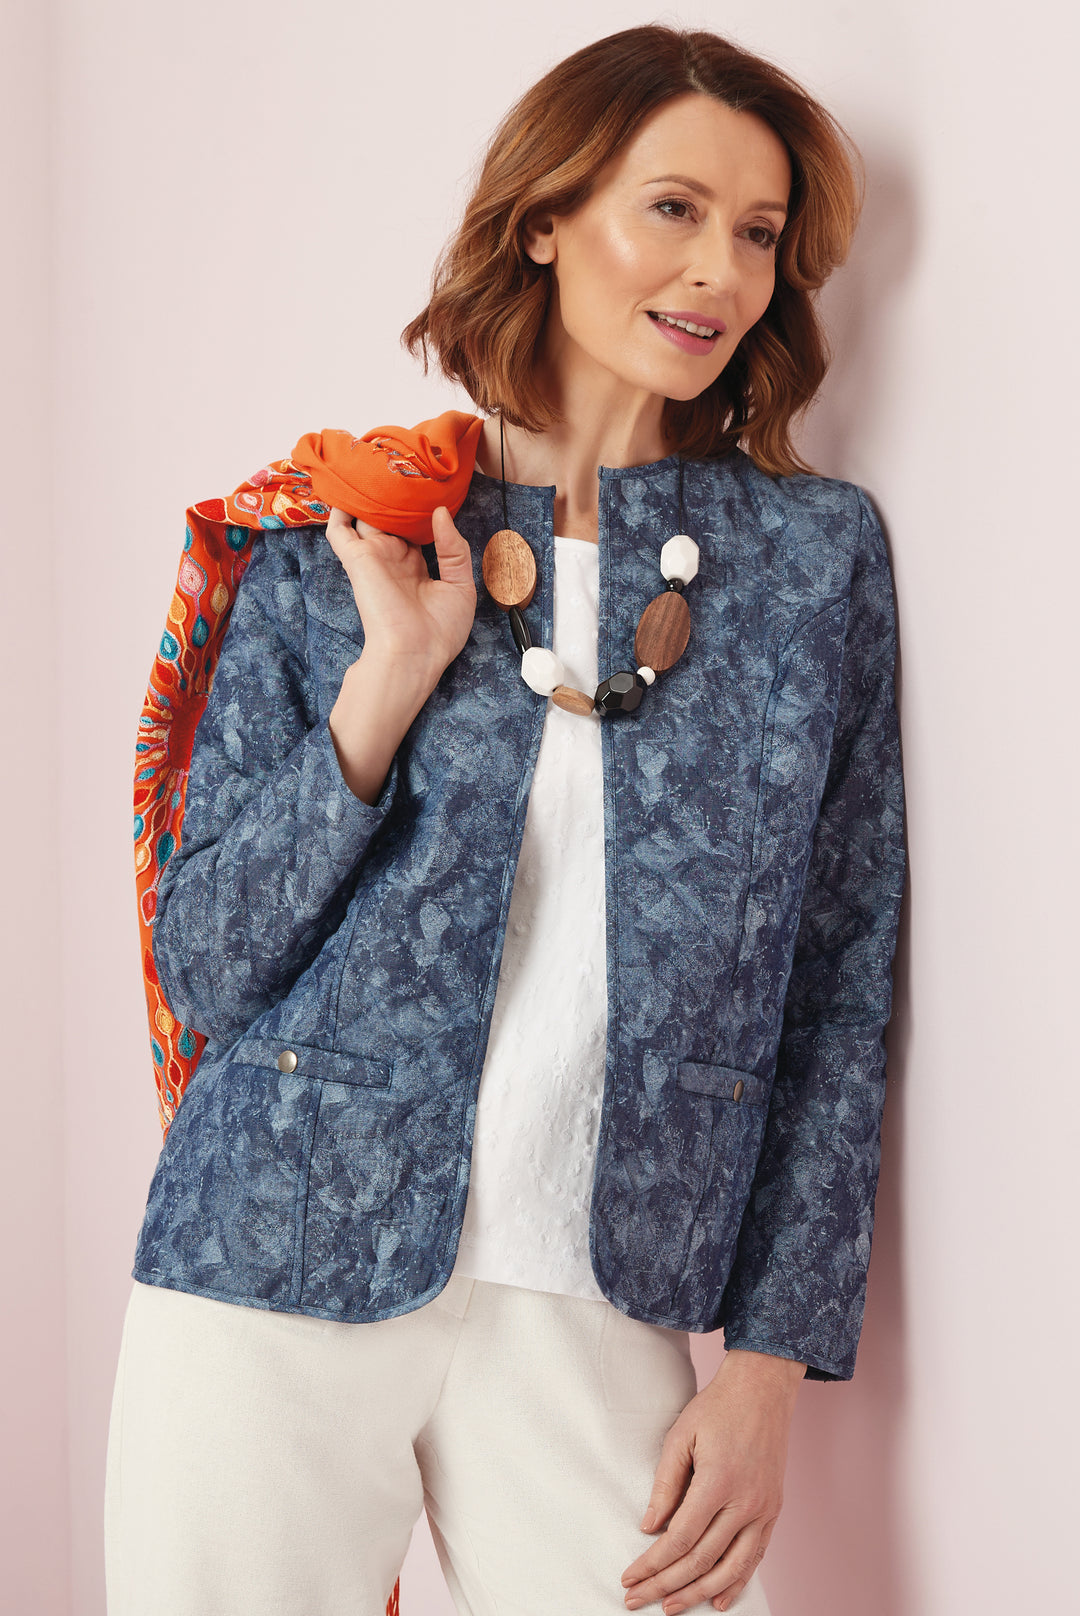 Lily Ella Collection stylish blue textured jacket on model paired with white blouse, cream trousers, and statement necklace, accented by orange patterned scarf.